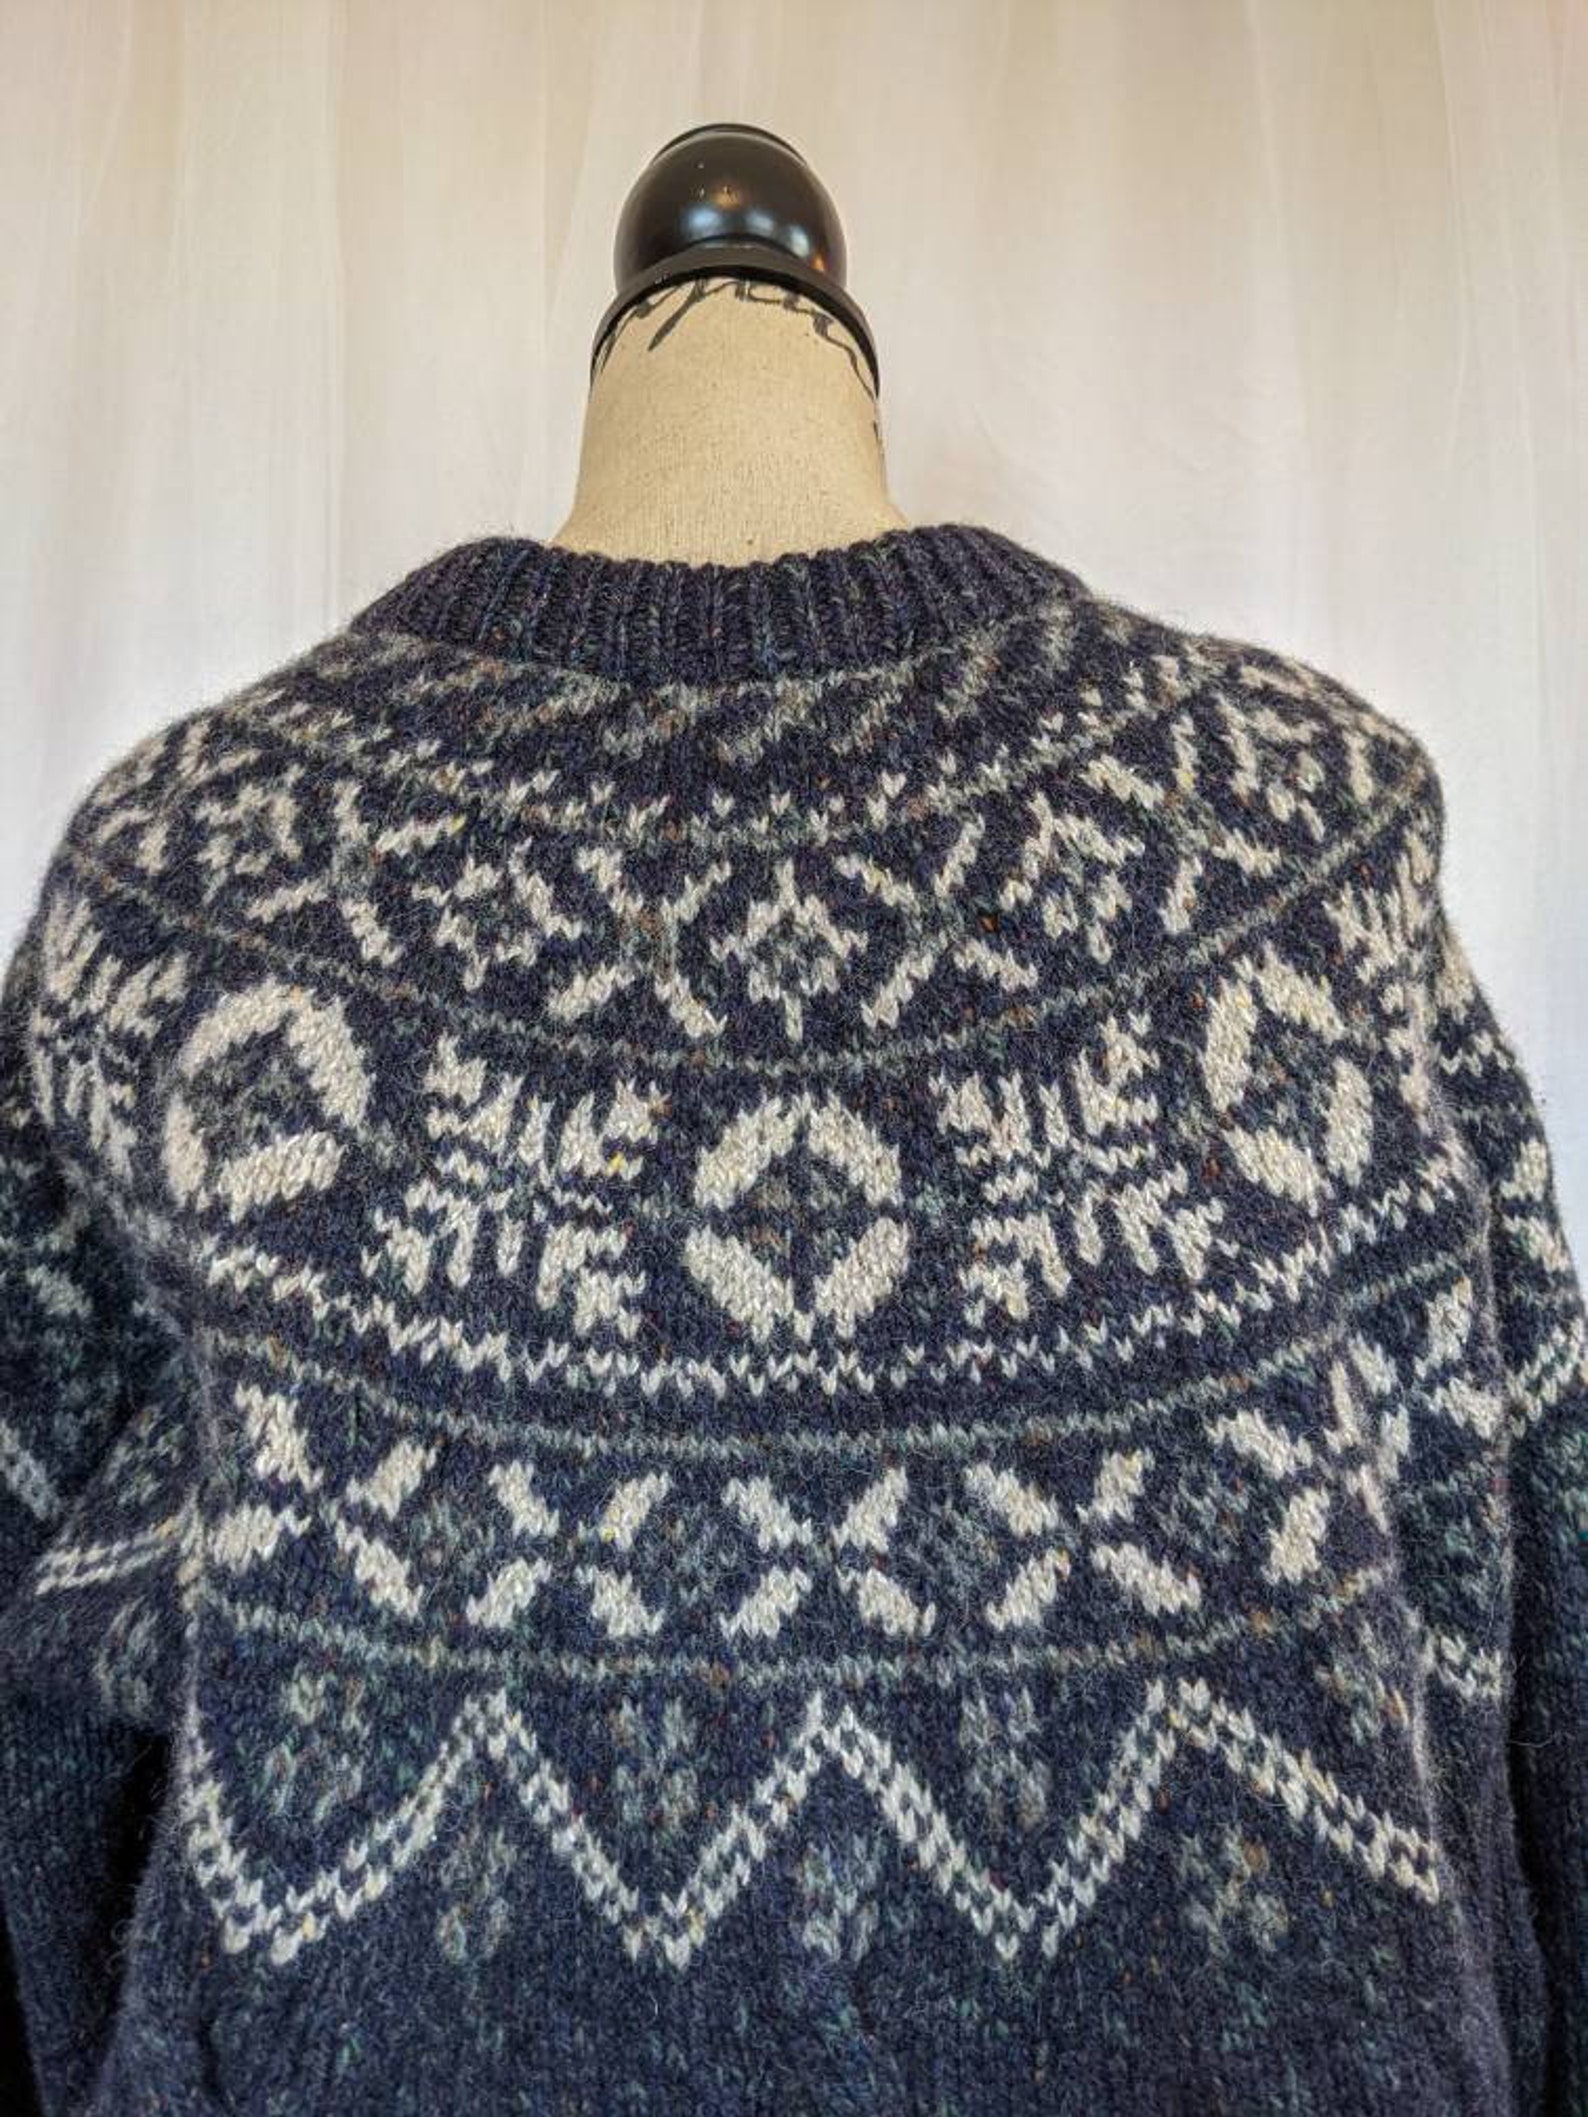 Vintage LL Bean Wool/Cotton Blend Oversized Knit Sweater | Etsy